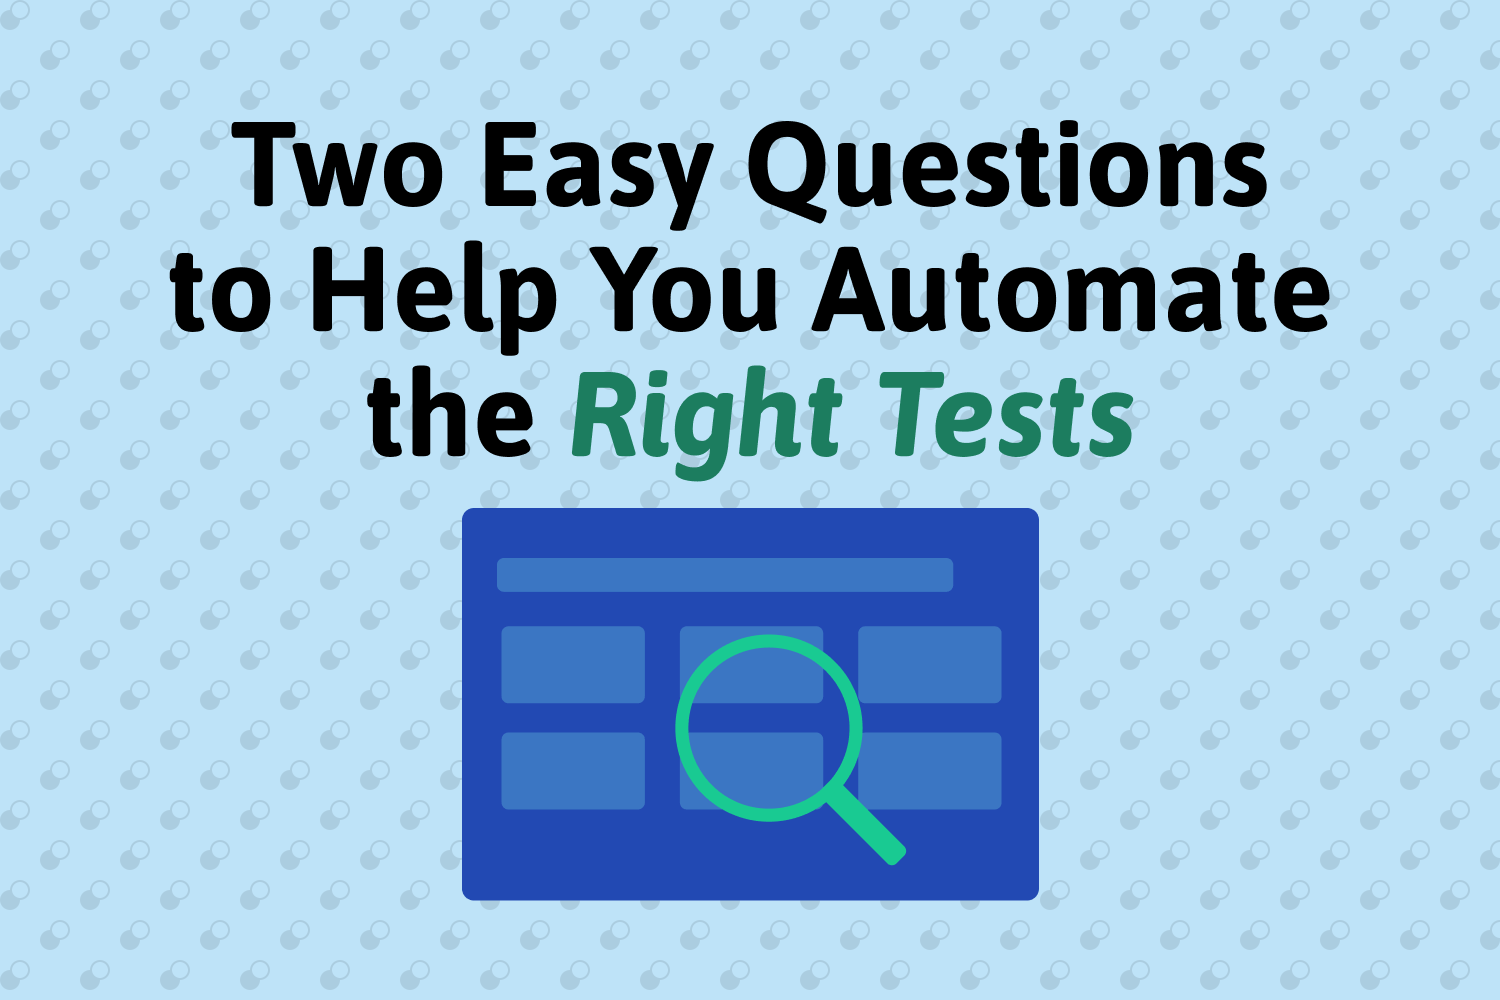 Two Easy Questions to Help You Automate the Right Tests